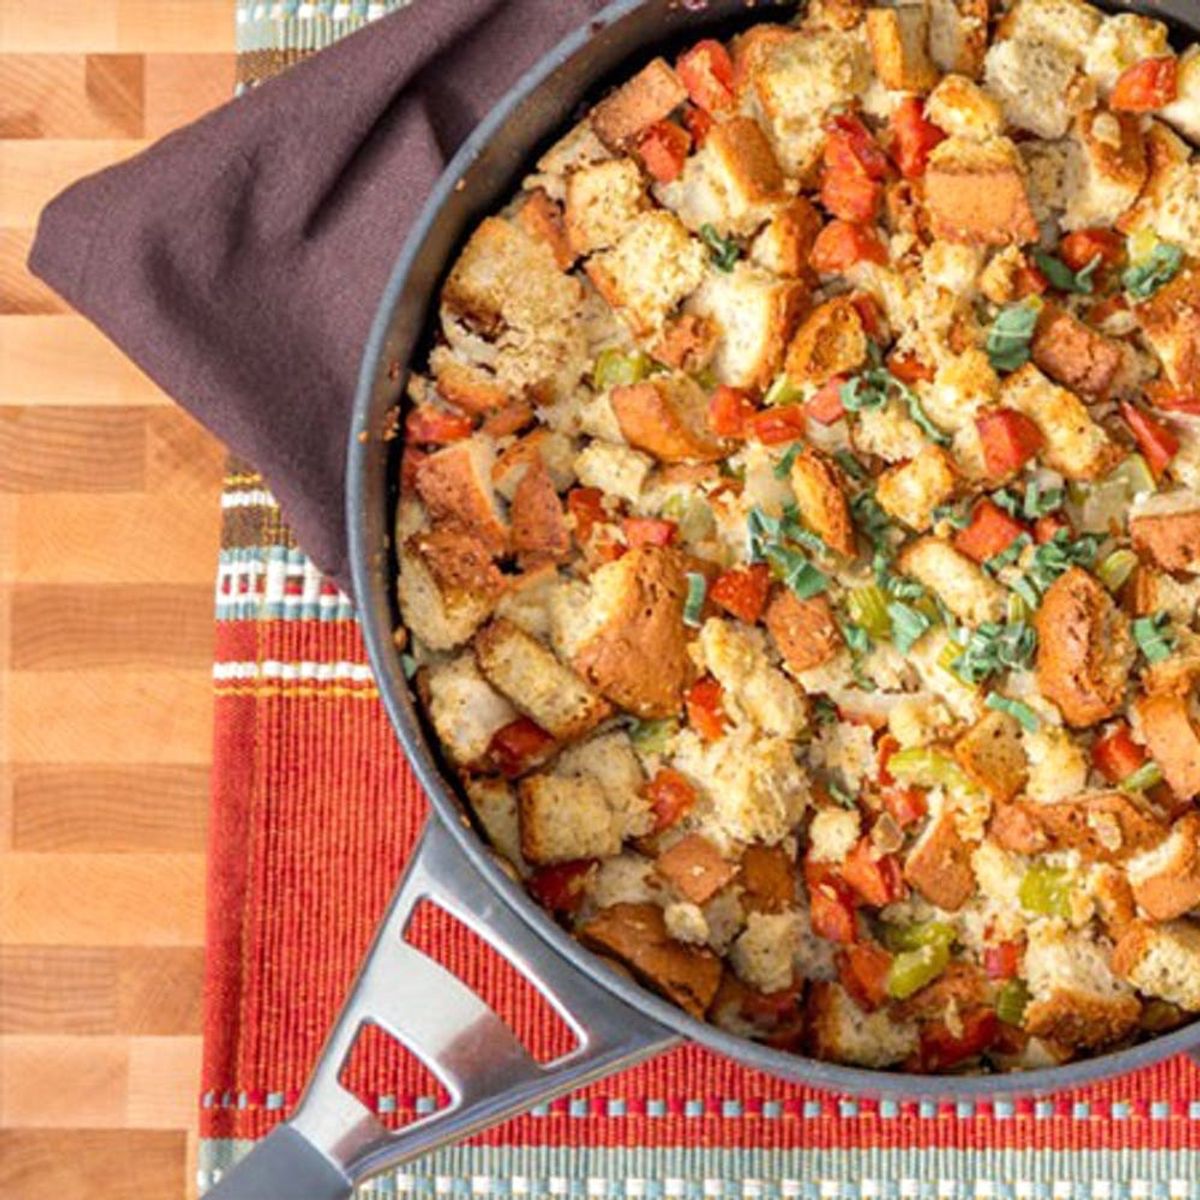 13 One-Pot Thanksgiving Recipes to Make Dinner Easy